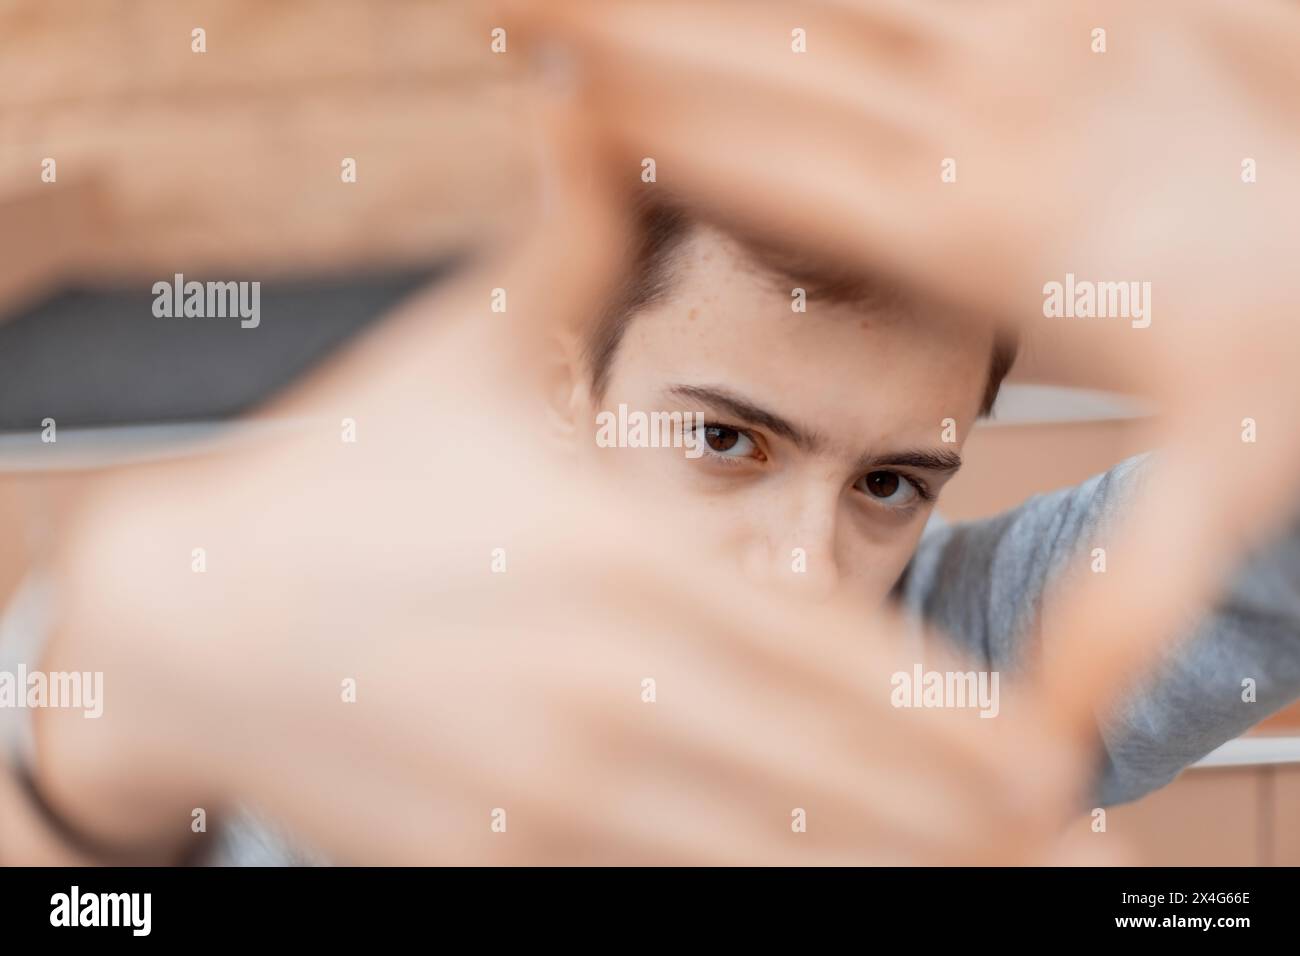 Selective focus on adolescent eyes looking in camera. Stock Photo